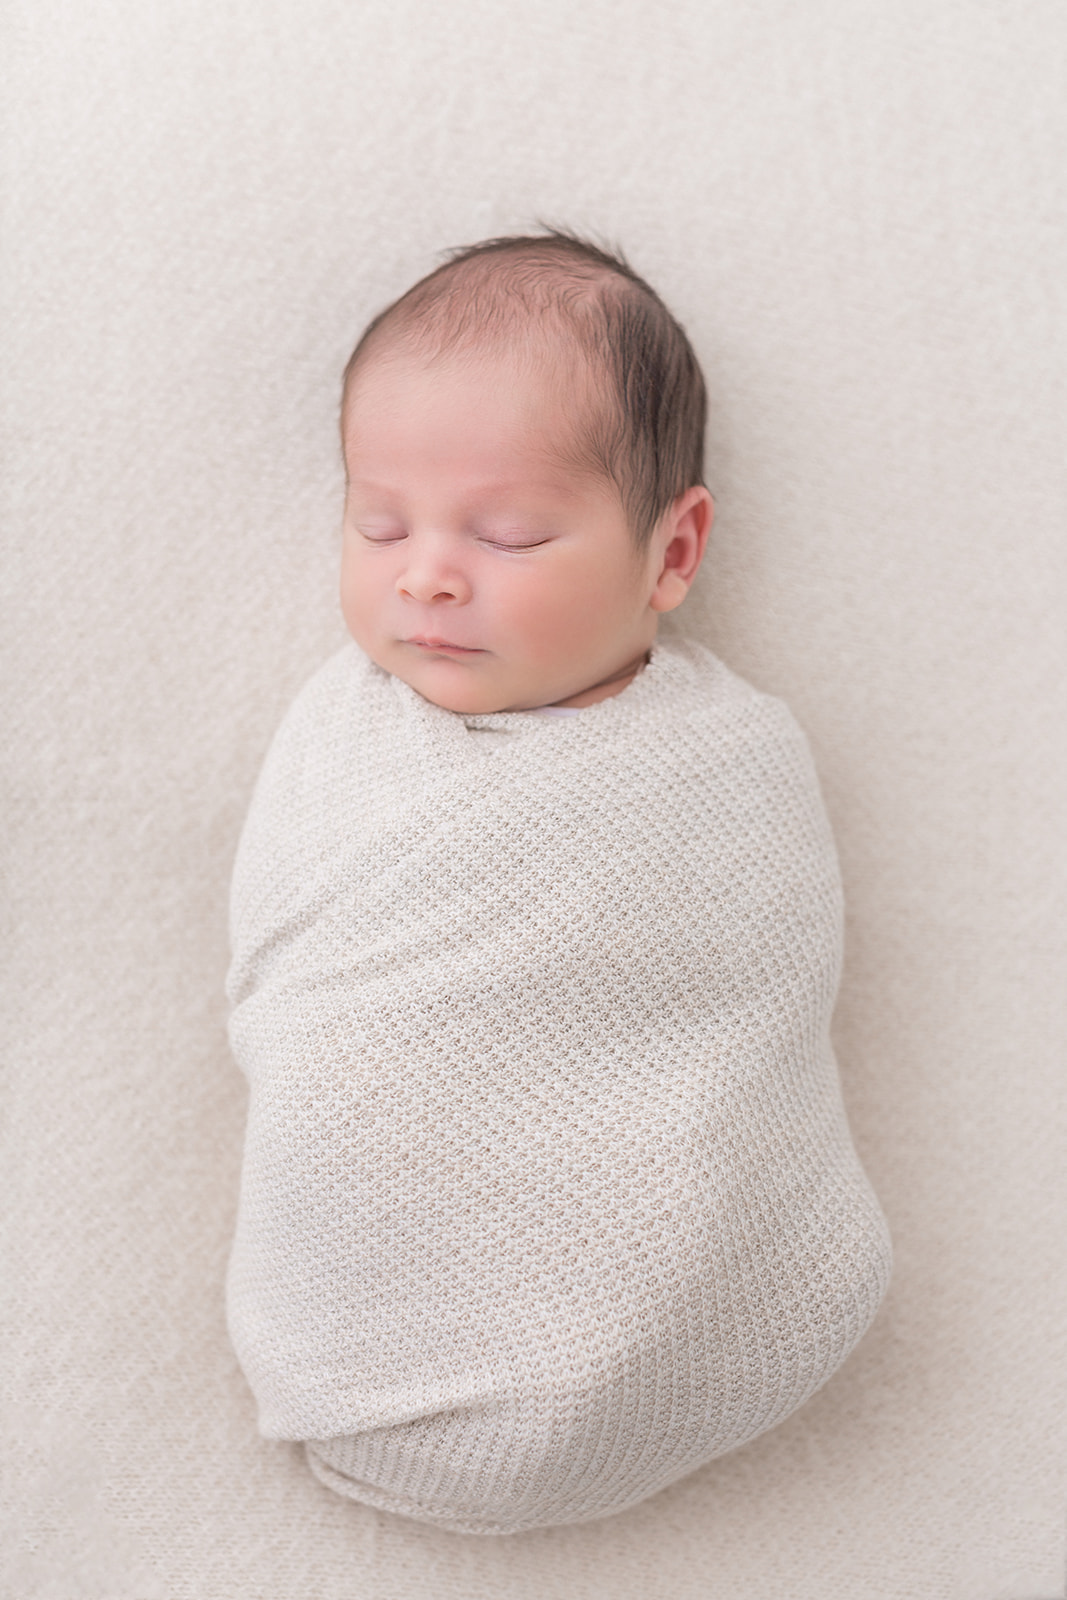 A newborn baby in a white knit swaddle sleeps on a white bed in a studio